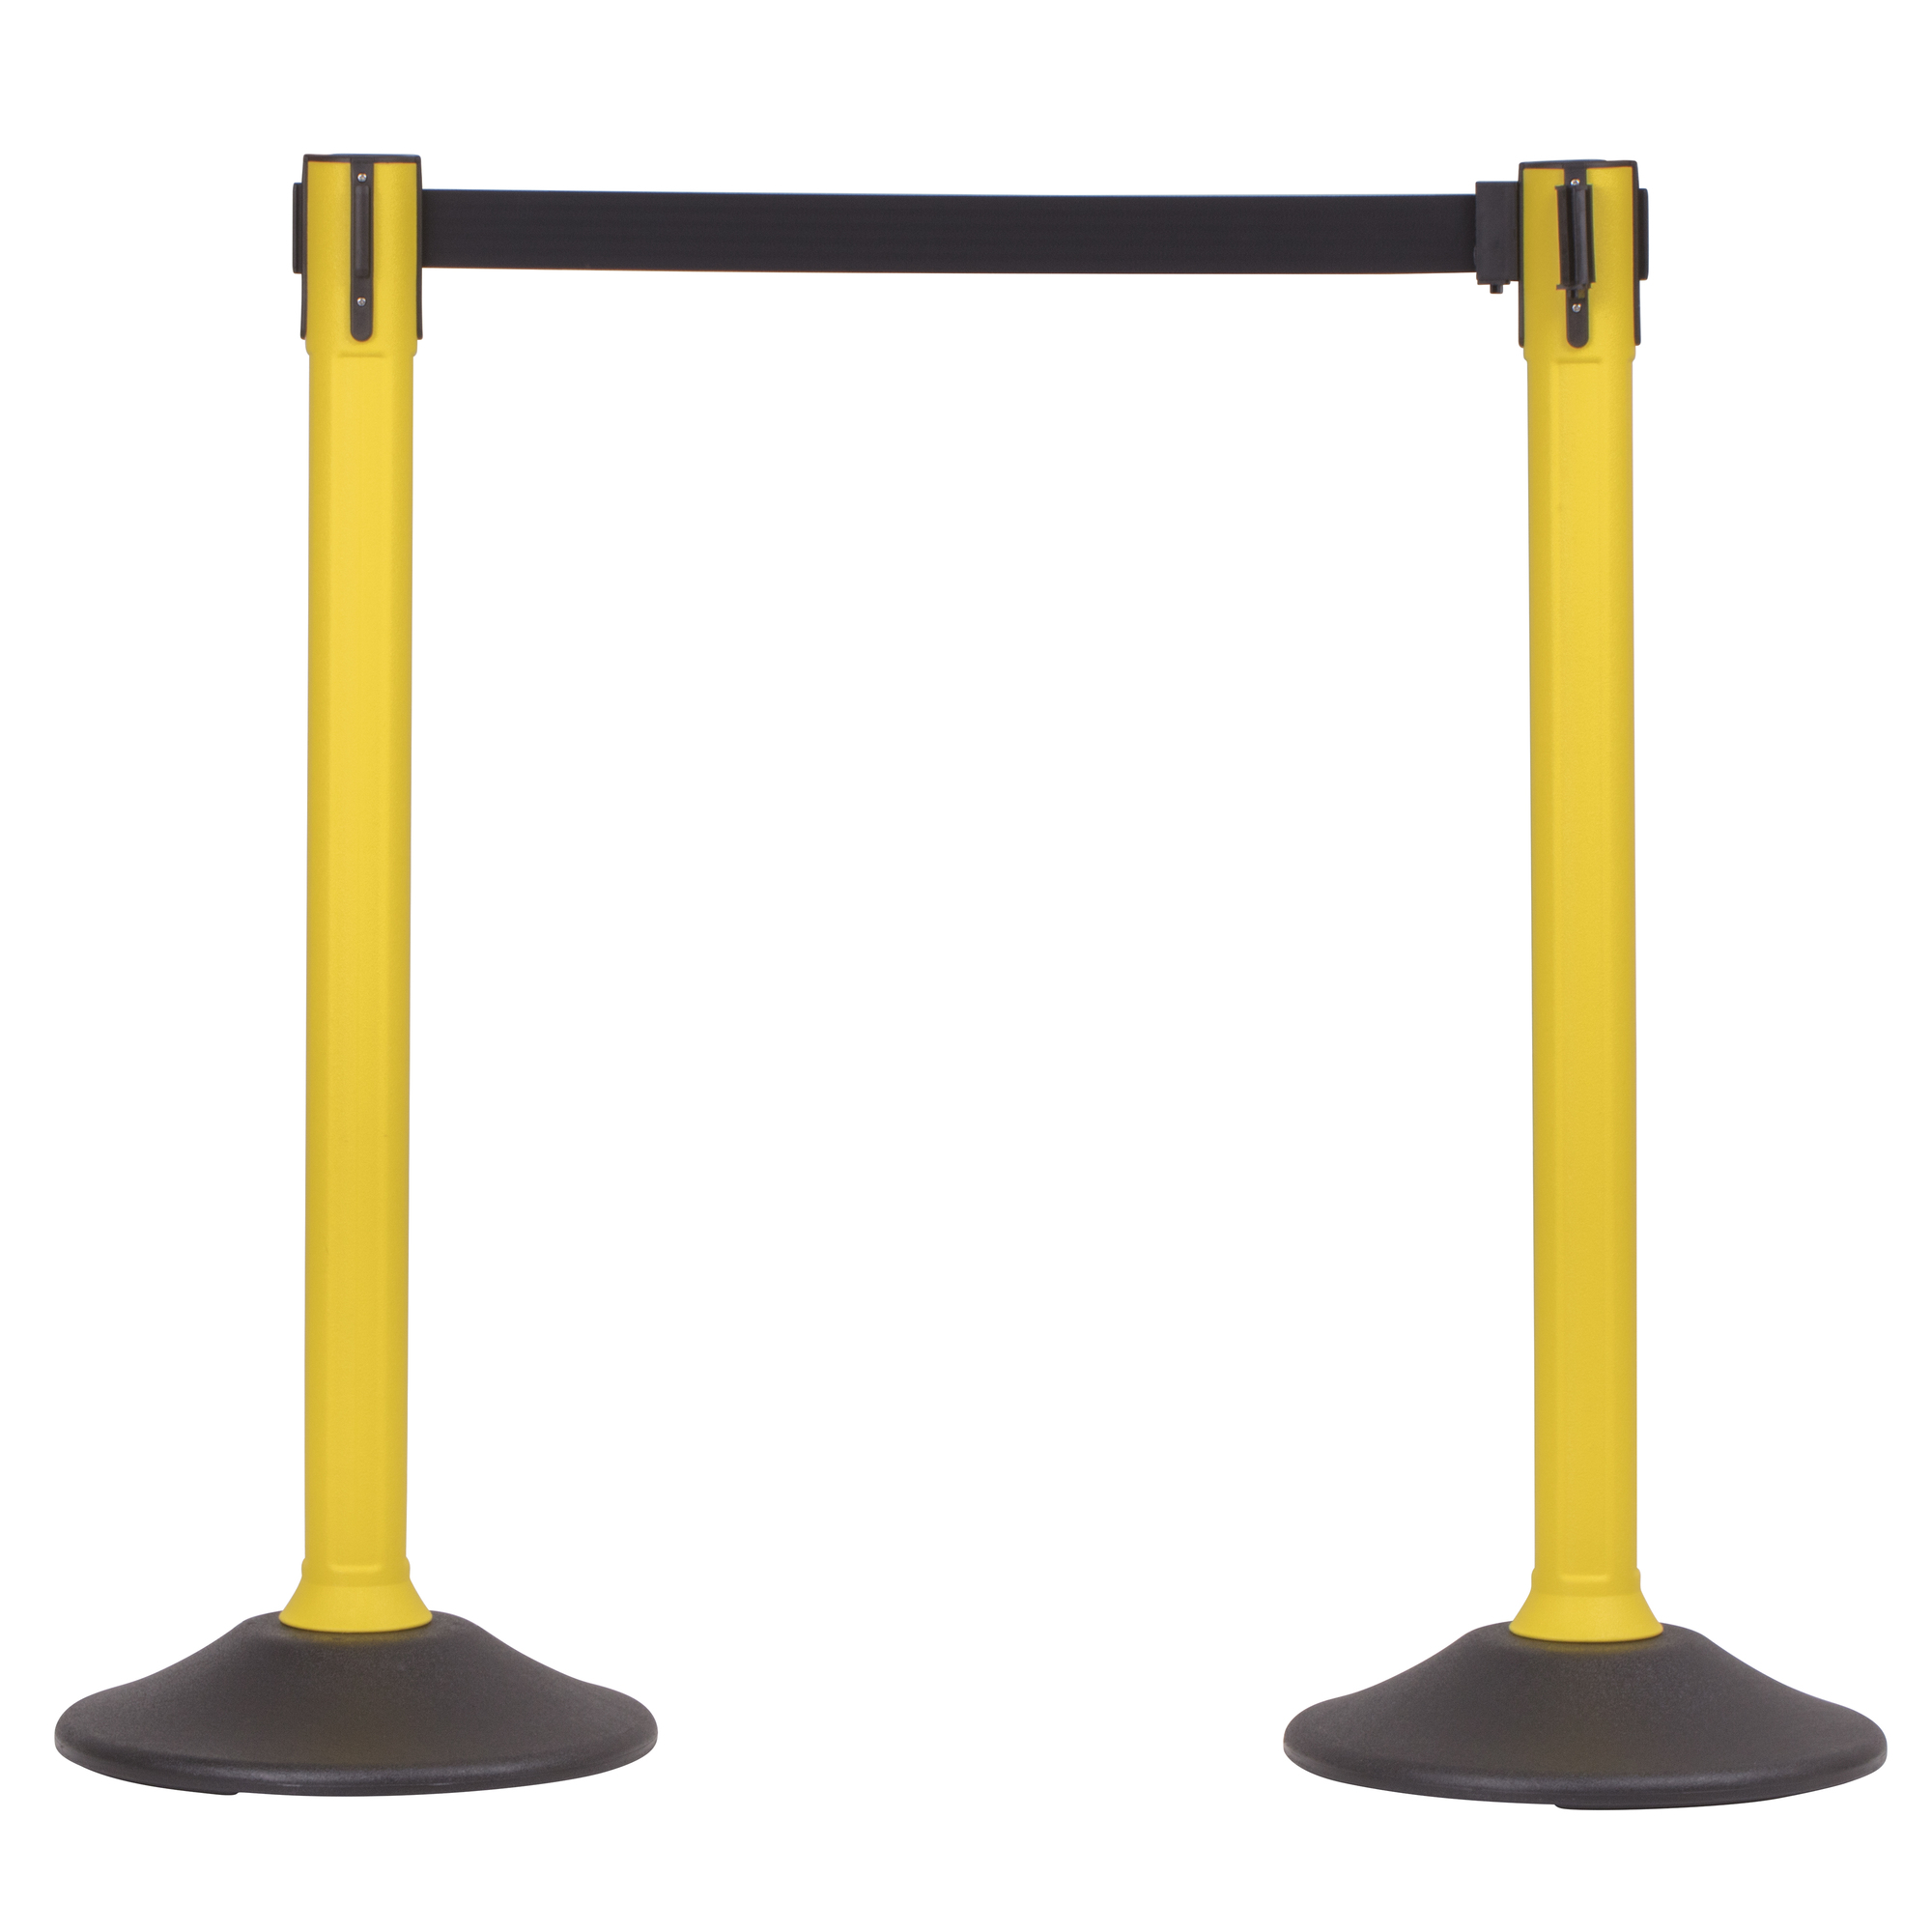 US Weight, Yellow post and 6.5ft. Black Belt - 2 pack, Model U2055